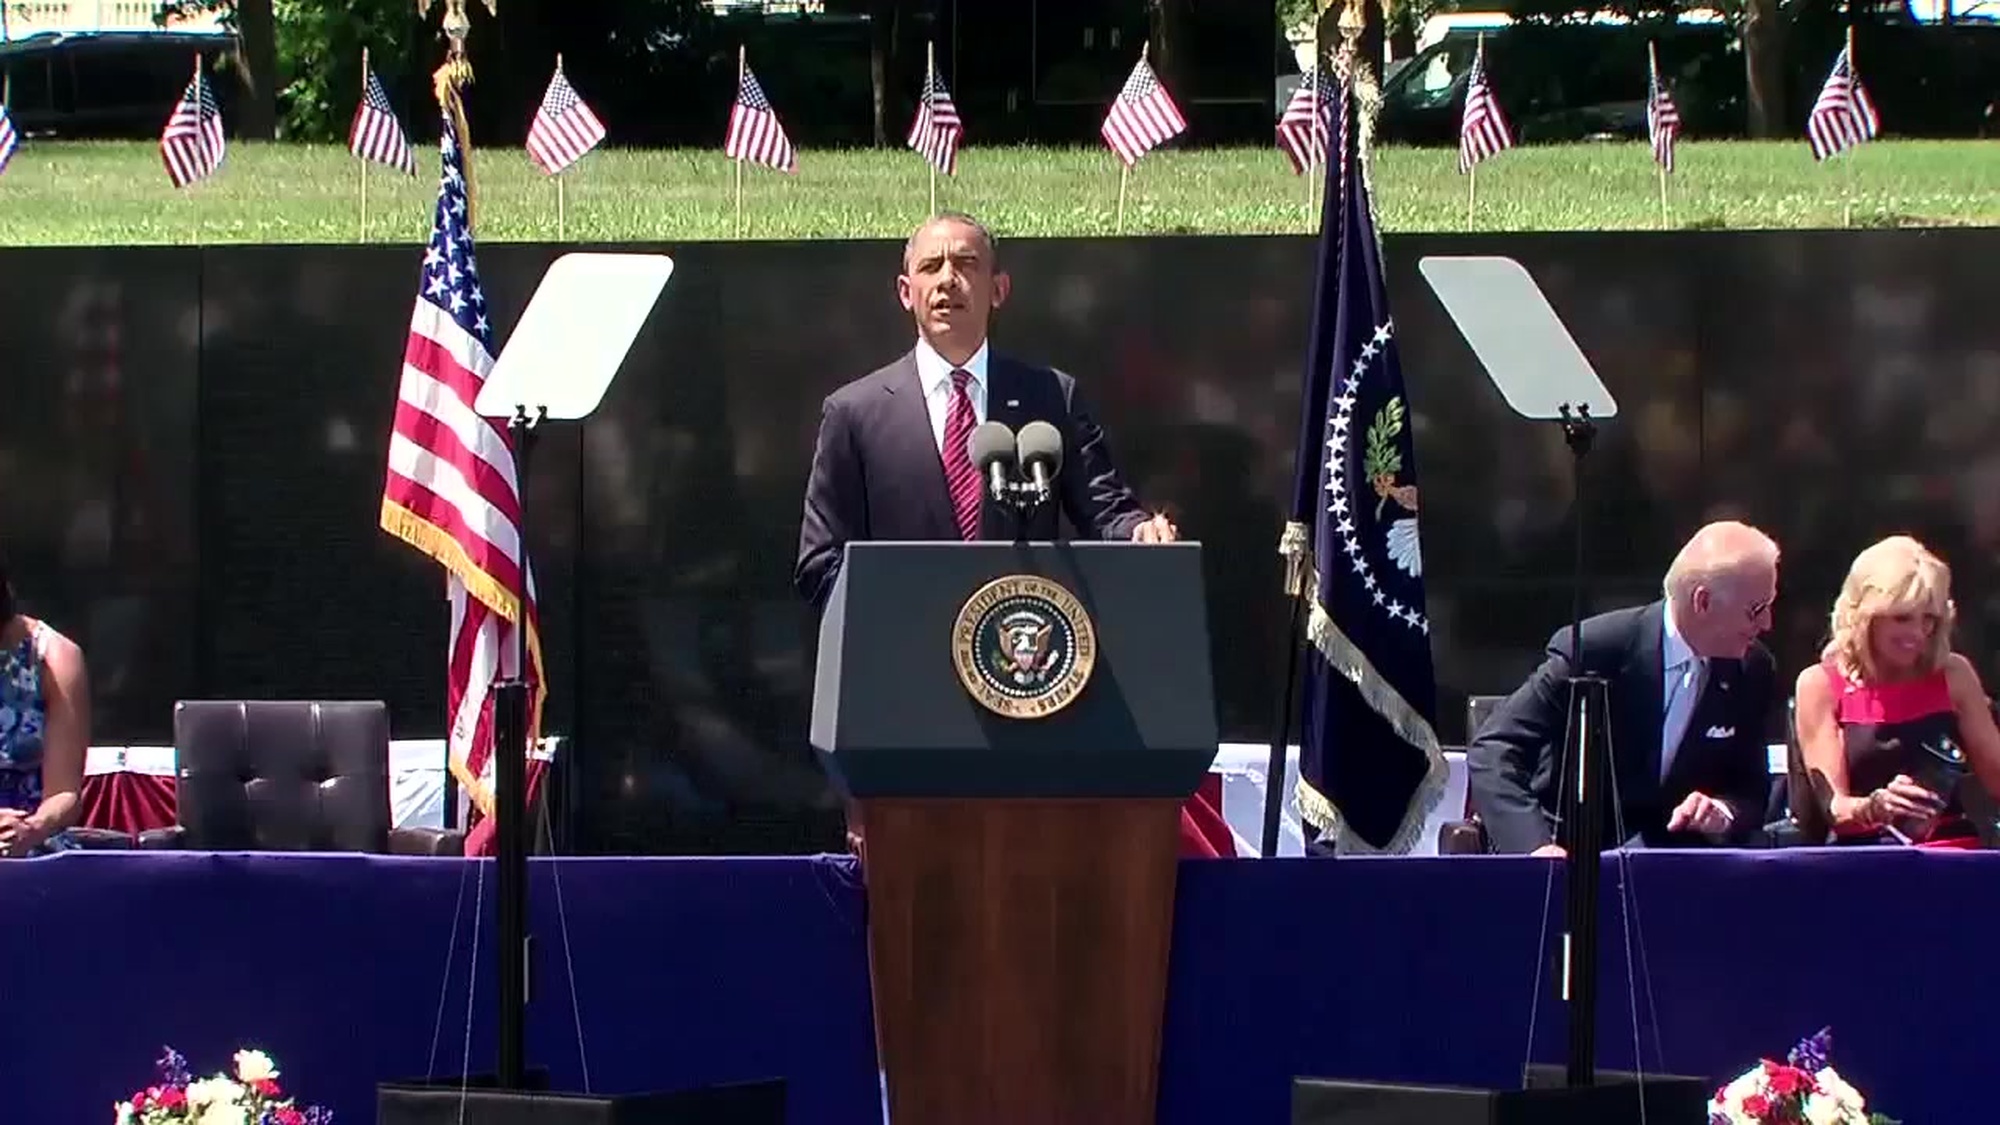 Remarks at the Vietnam Wall by President Barack Obama at the Commemoration Ceremony of the 50th Anniversary of the Vietnam War, May 28th, 2012, Washington, DC.  Please visit www.VietnamWar50th.com for more information.  Join the nation...thank a Vietnam Veteran!